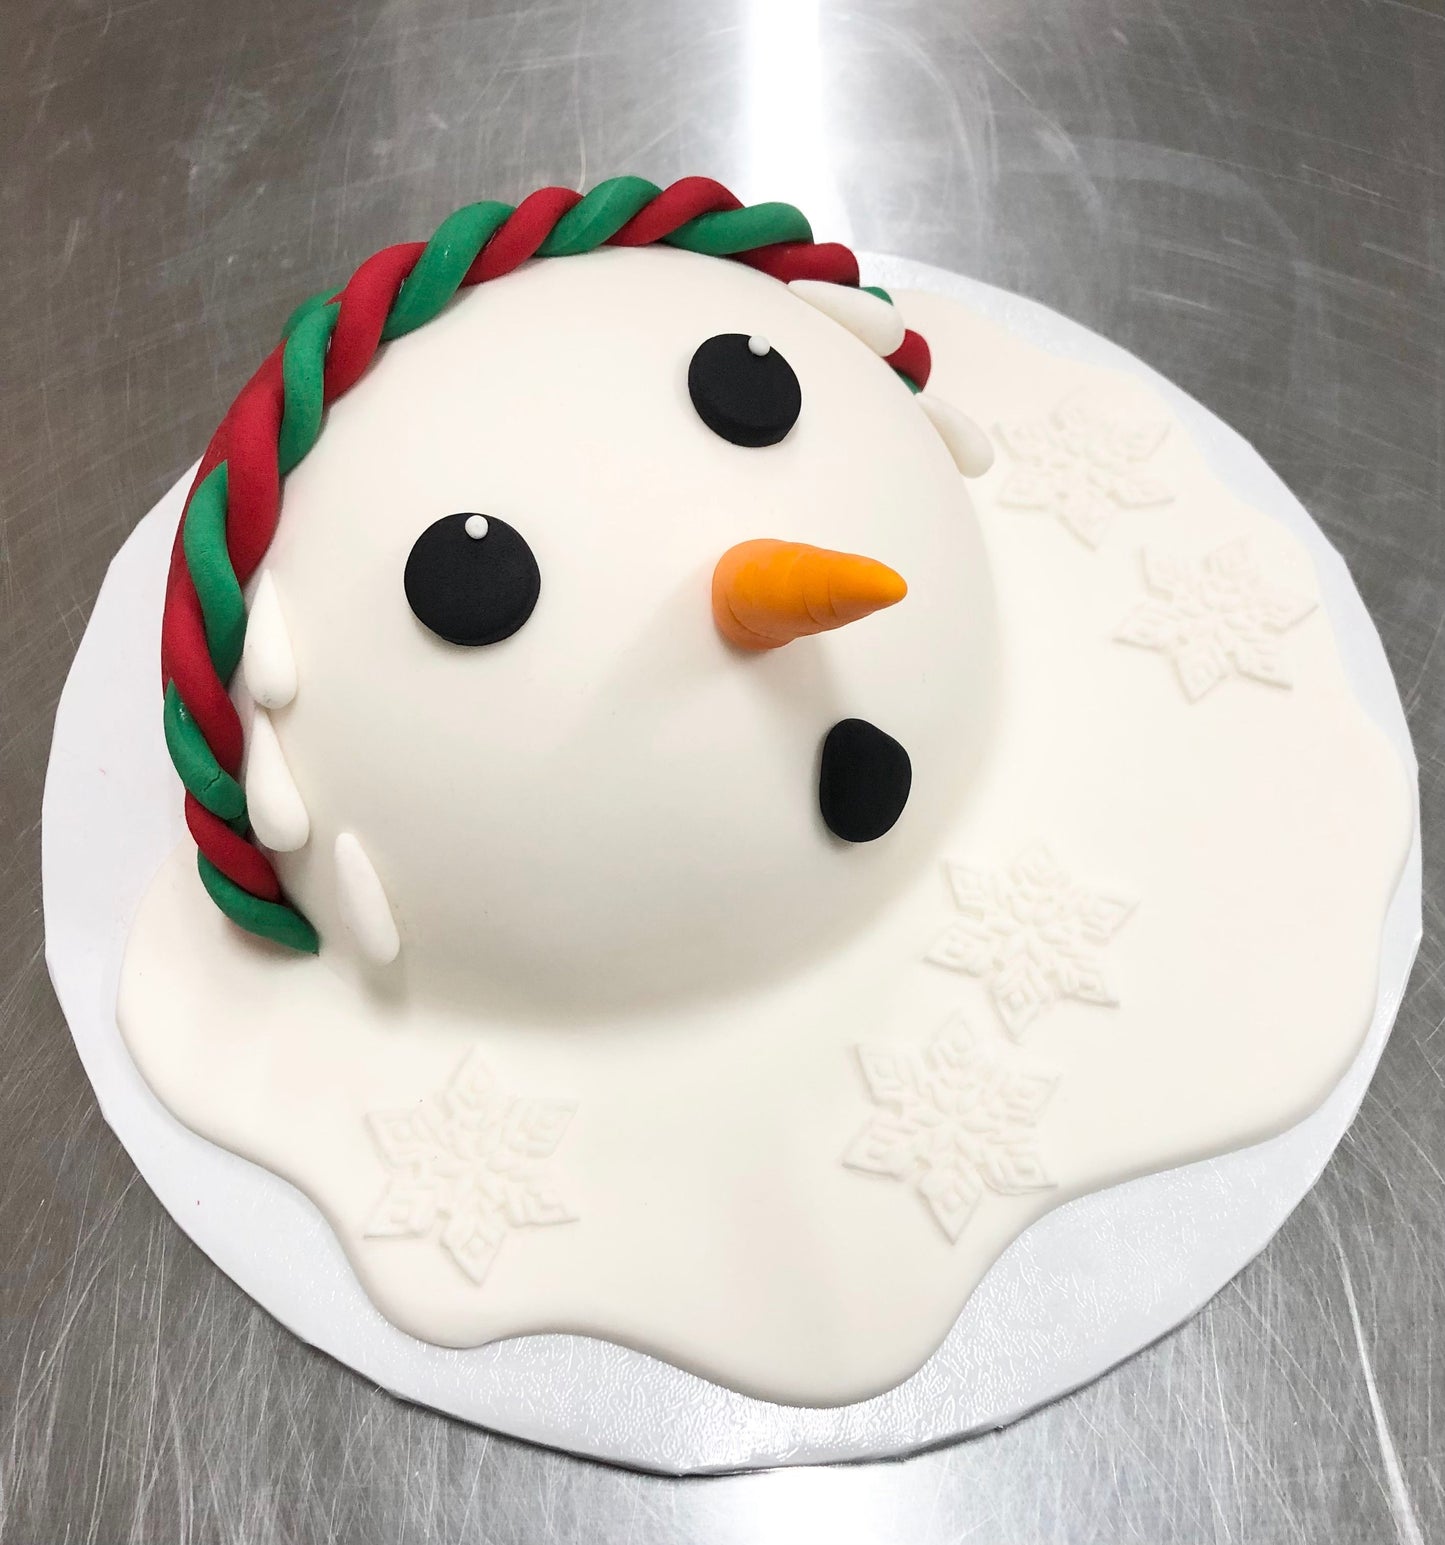 Cake in the box - Snowman - Add on kit